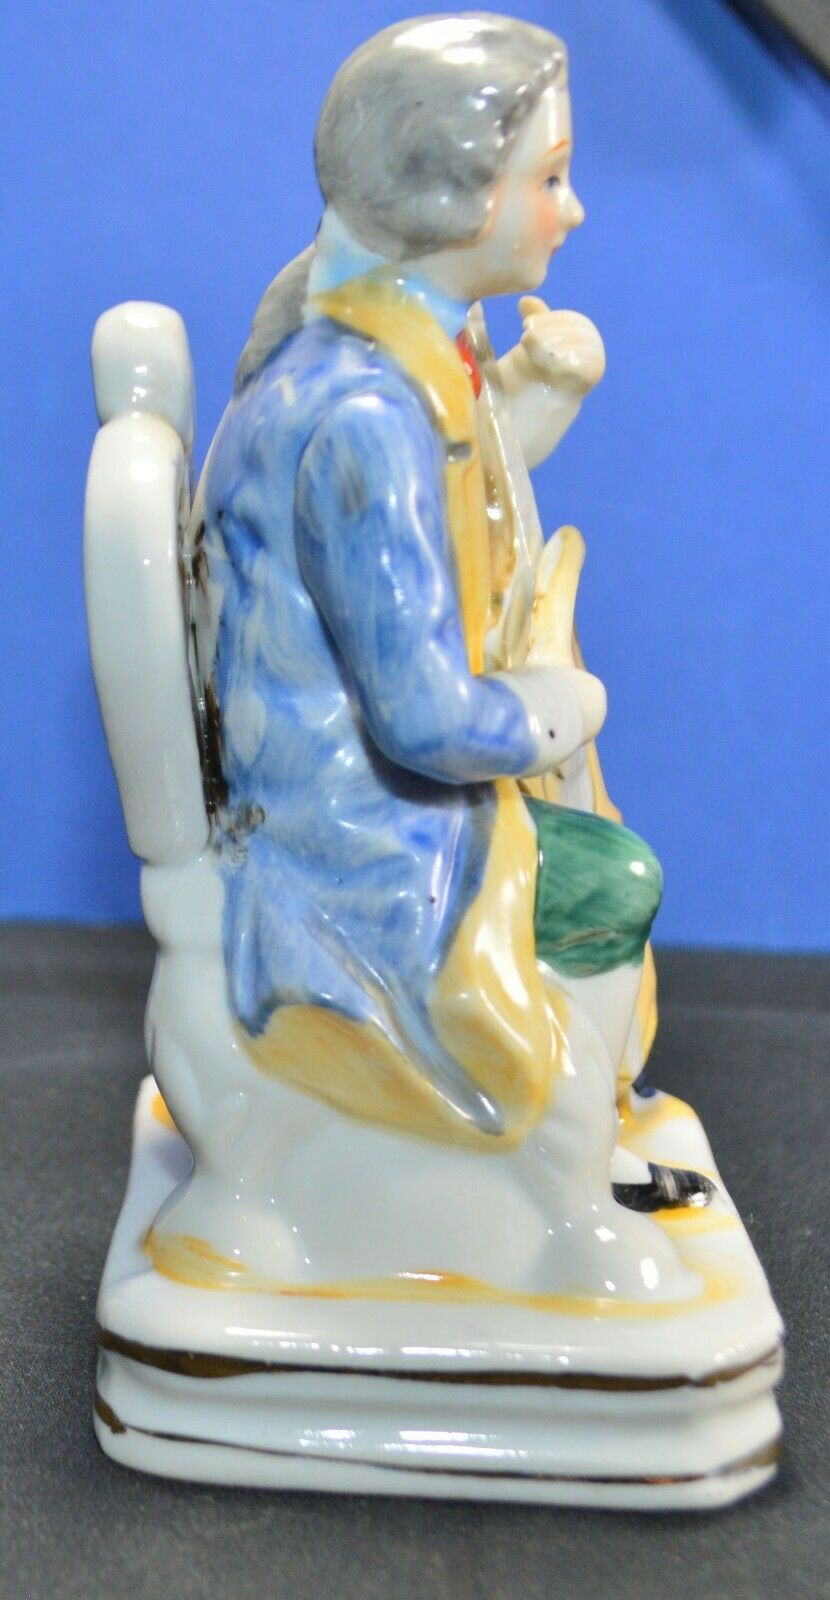 CELLO PLAYER DECORATIVE FIGURINE( PREVIOUSLY OWNED) GOOD CONDITION - TMD167207